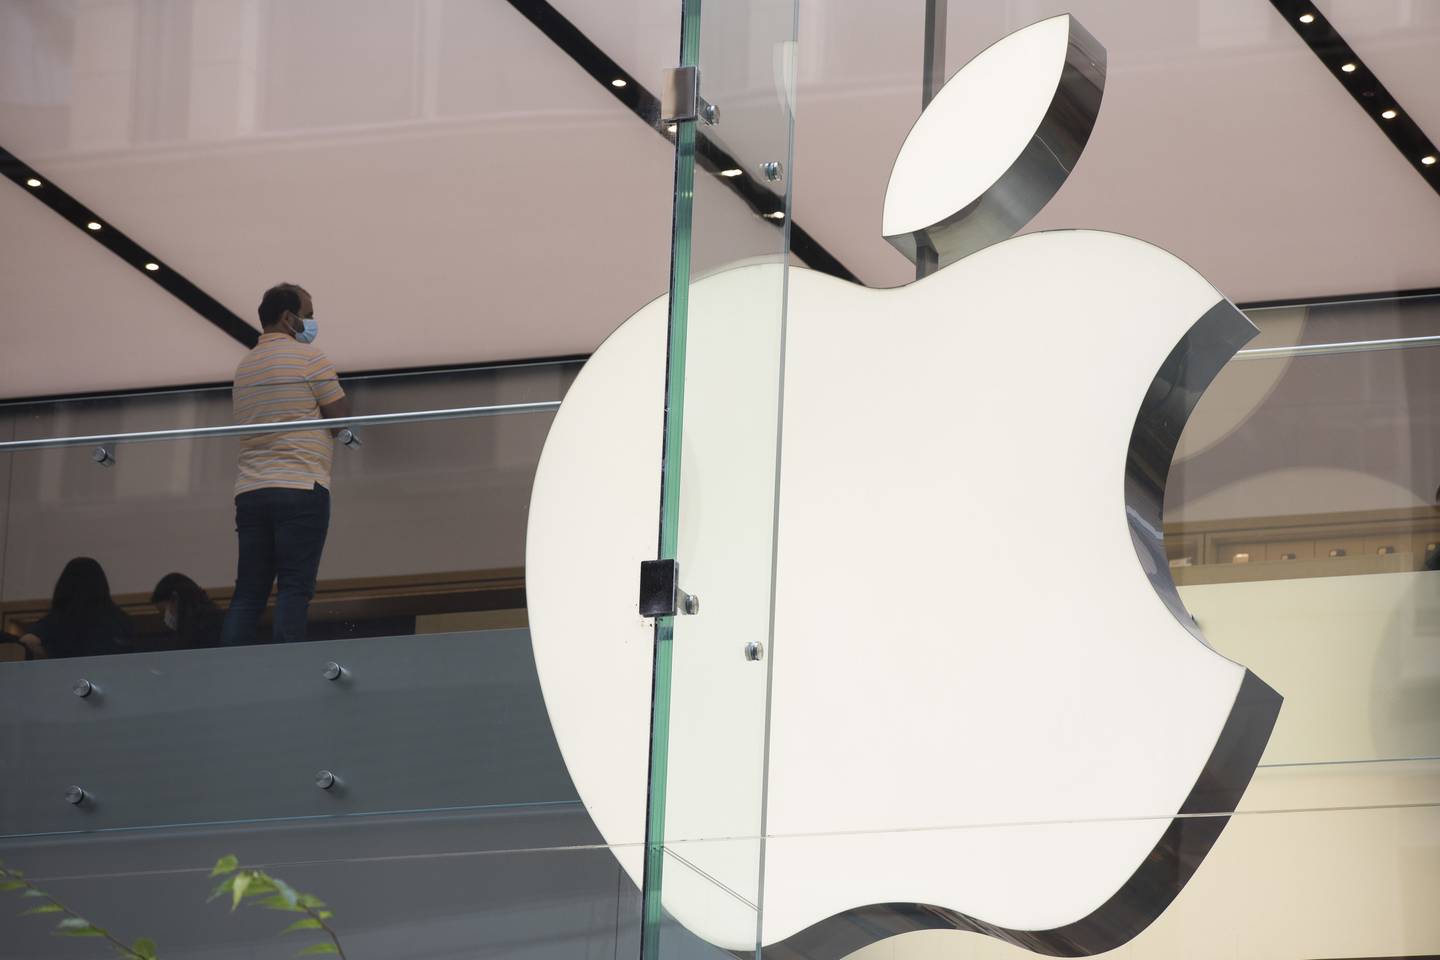 A customer stands near an Apple Inc. logo at a store in Sydney, Australia, on Monday, Feb. 28, 2022. Australia is scheduled to release gross domestic product (GDP) figures on March 2. Photographer: Brent Lewin/Bloomberg